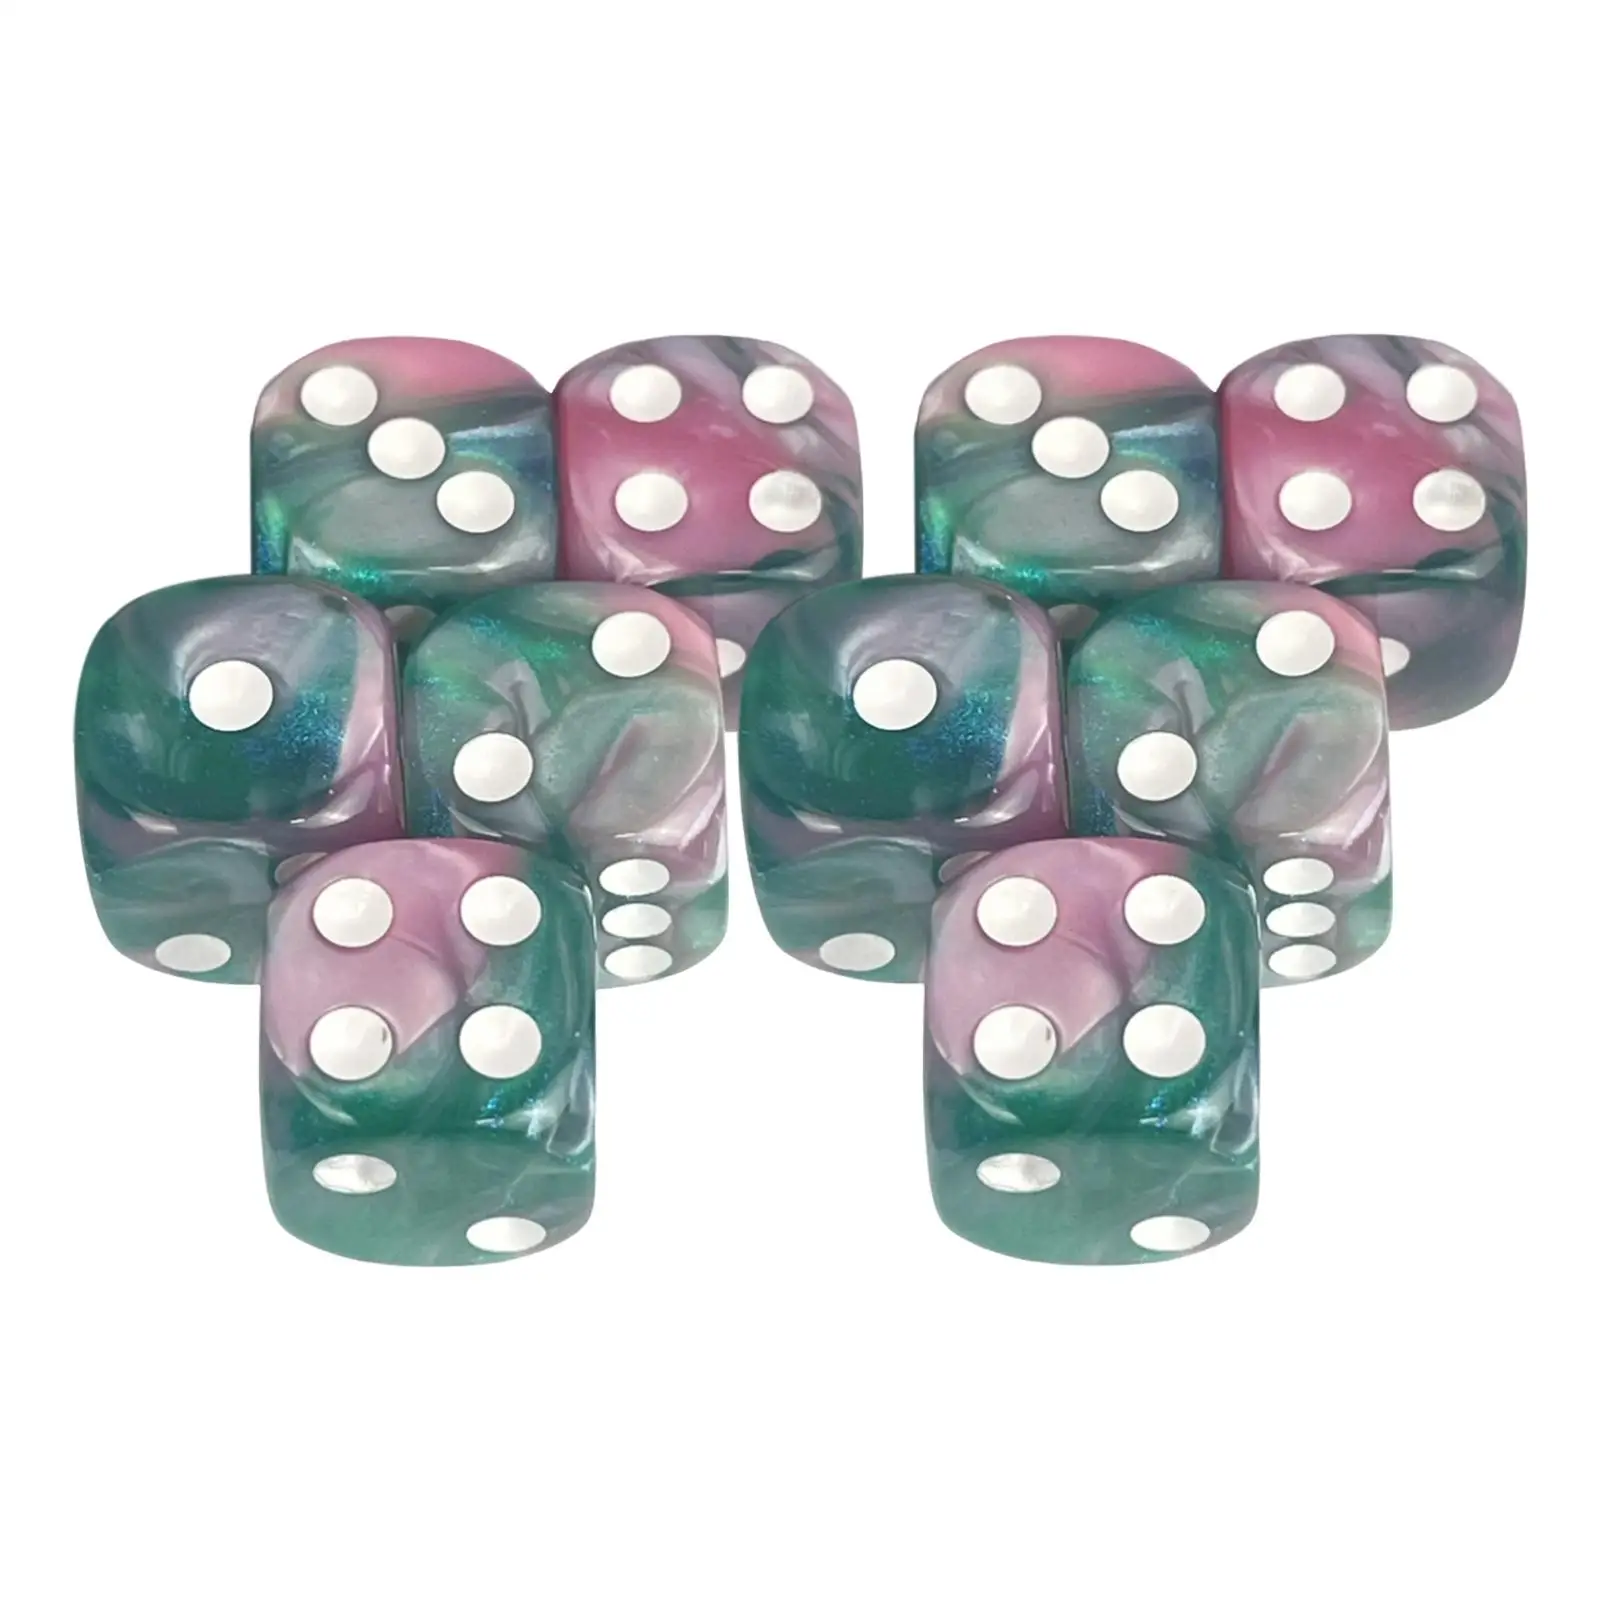 10x Acrylic D6 Dices Set Family Table Game 16mm Polyhedral Dices for Party Party Favors Family Gathering Kids